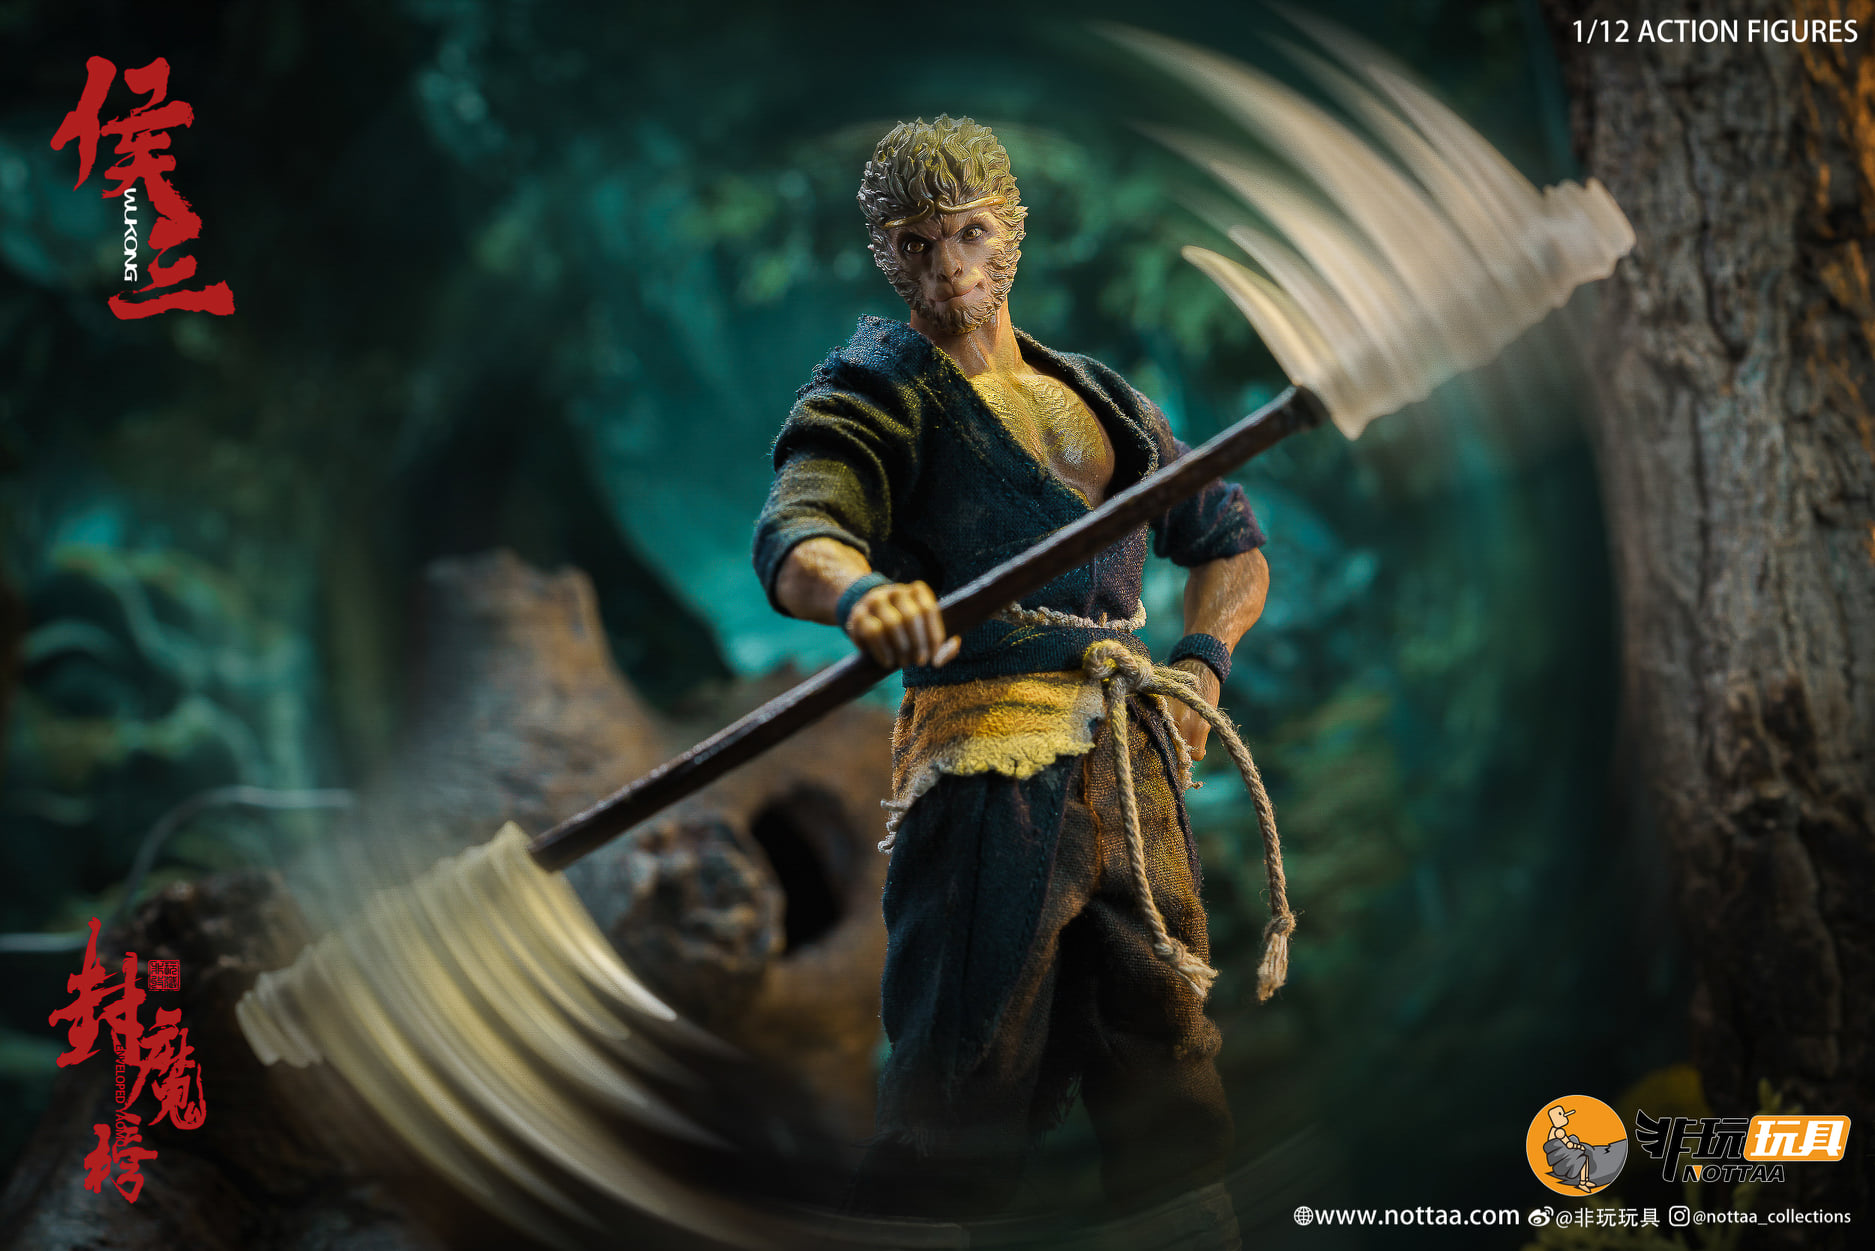 NEW PRODUCT: 1/12 NOTTAA | The Seal of Demons - Martial Artist Monk WUKONG 4610